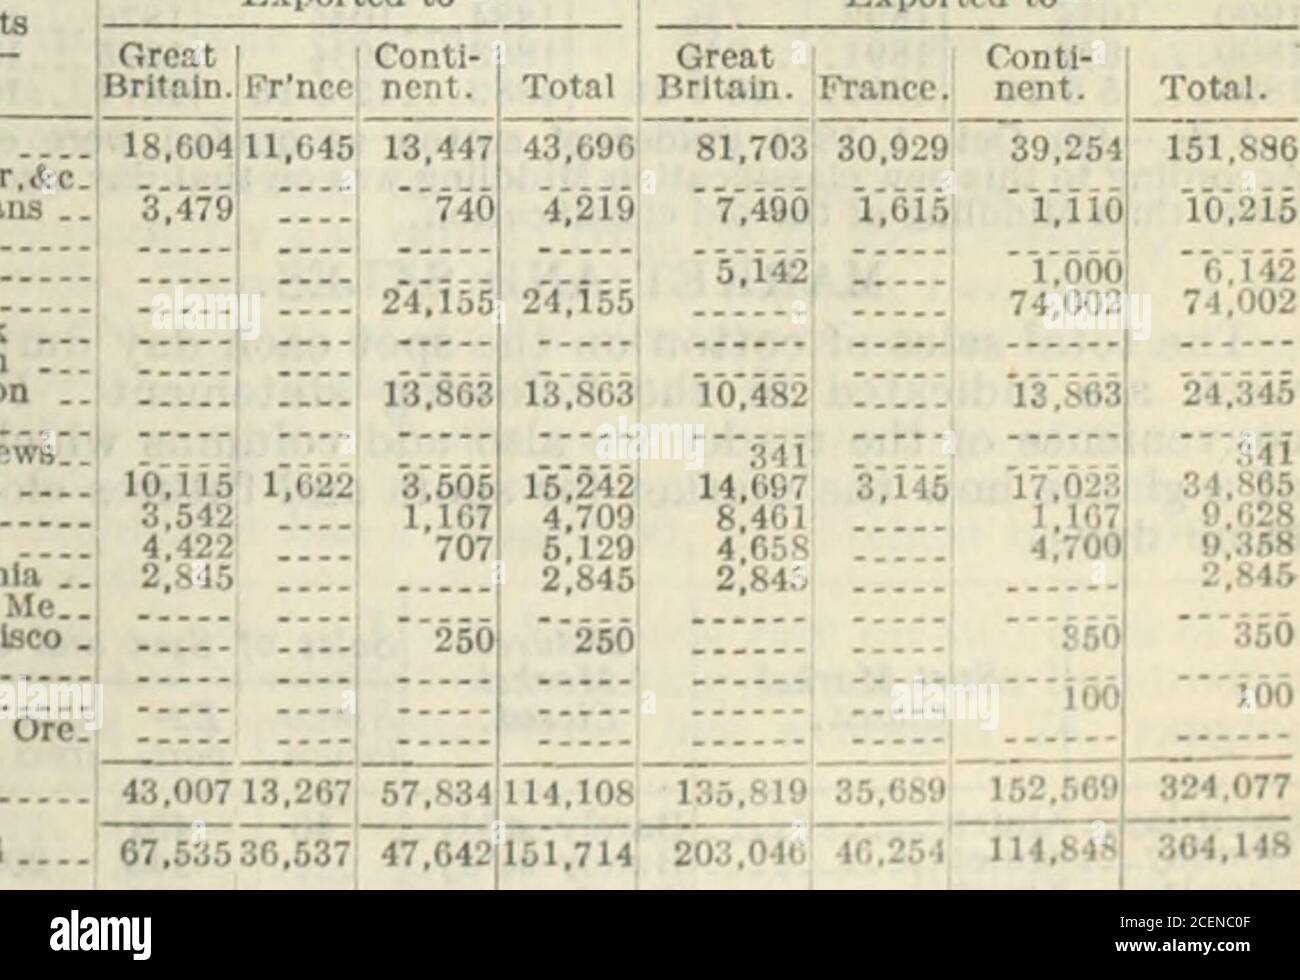 . The Commercial and financial chronicle. als at leading ports for six seasons. Receipts at 1905. 1904. 1903. 1902. 1901. 1900. Galvu, &c. 83,195 115,931 69,910 86,416 57,449 32,755 N. Orleans. 12,124 35,166 26,943 54,177 35,278 116,738 Mobile 9,363 8,017 6,605 7,176 4,122 6,915 Savannah . 76,646 75,913 45,260 57,590 32,750 59,117 Chston, &c 14,659 10,882 11,666 18,079 2,967 21,099 Wilmt, &c. 17,391 18,189 16,658 25,063 0,490 18,397 Norfolk 23,266 20,410 21,250 14,836 5,100 18,537 NptN.,&c 130 132 192 827 163 All others.. 7,350 4,508 1,778 1,723 1,858 6,032 Tot .this wk 244,124 289,148 200,262 Stock Photo